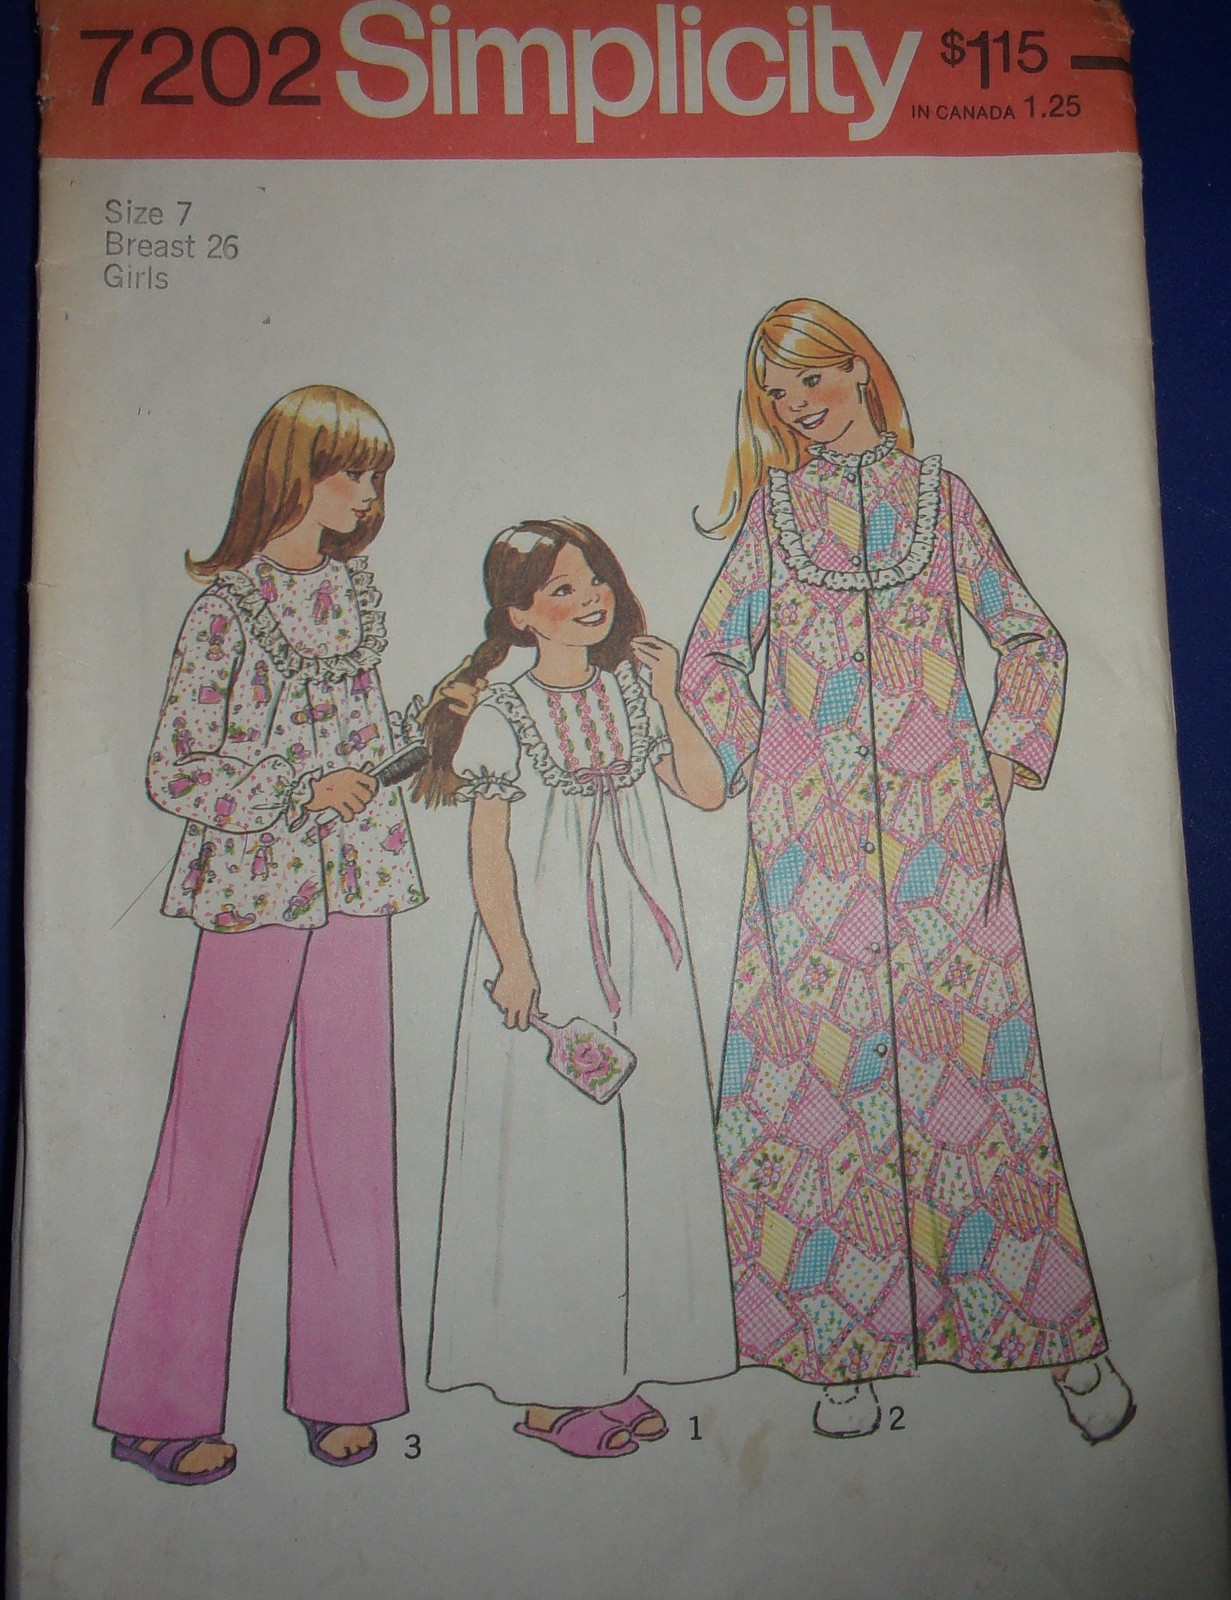 Primary image for Simplicity Girls’ Robe Nightgown & Pajamas Size 7 #7202